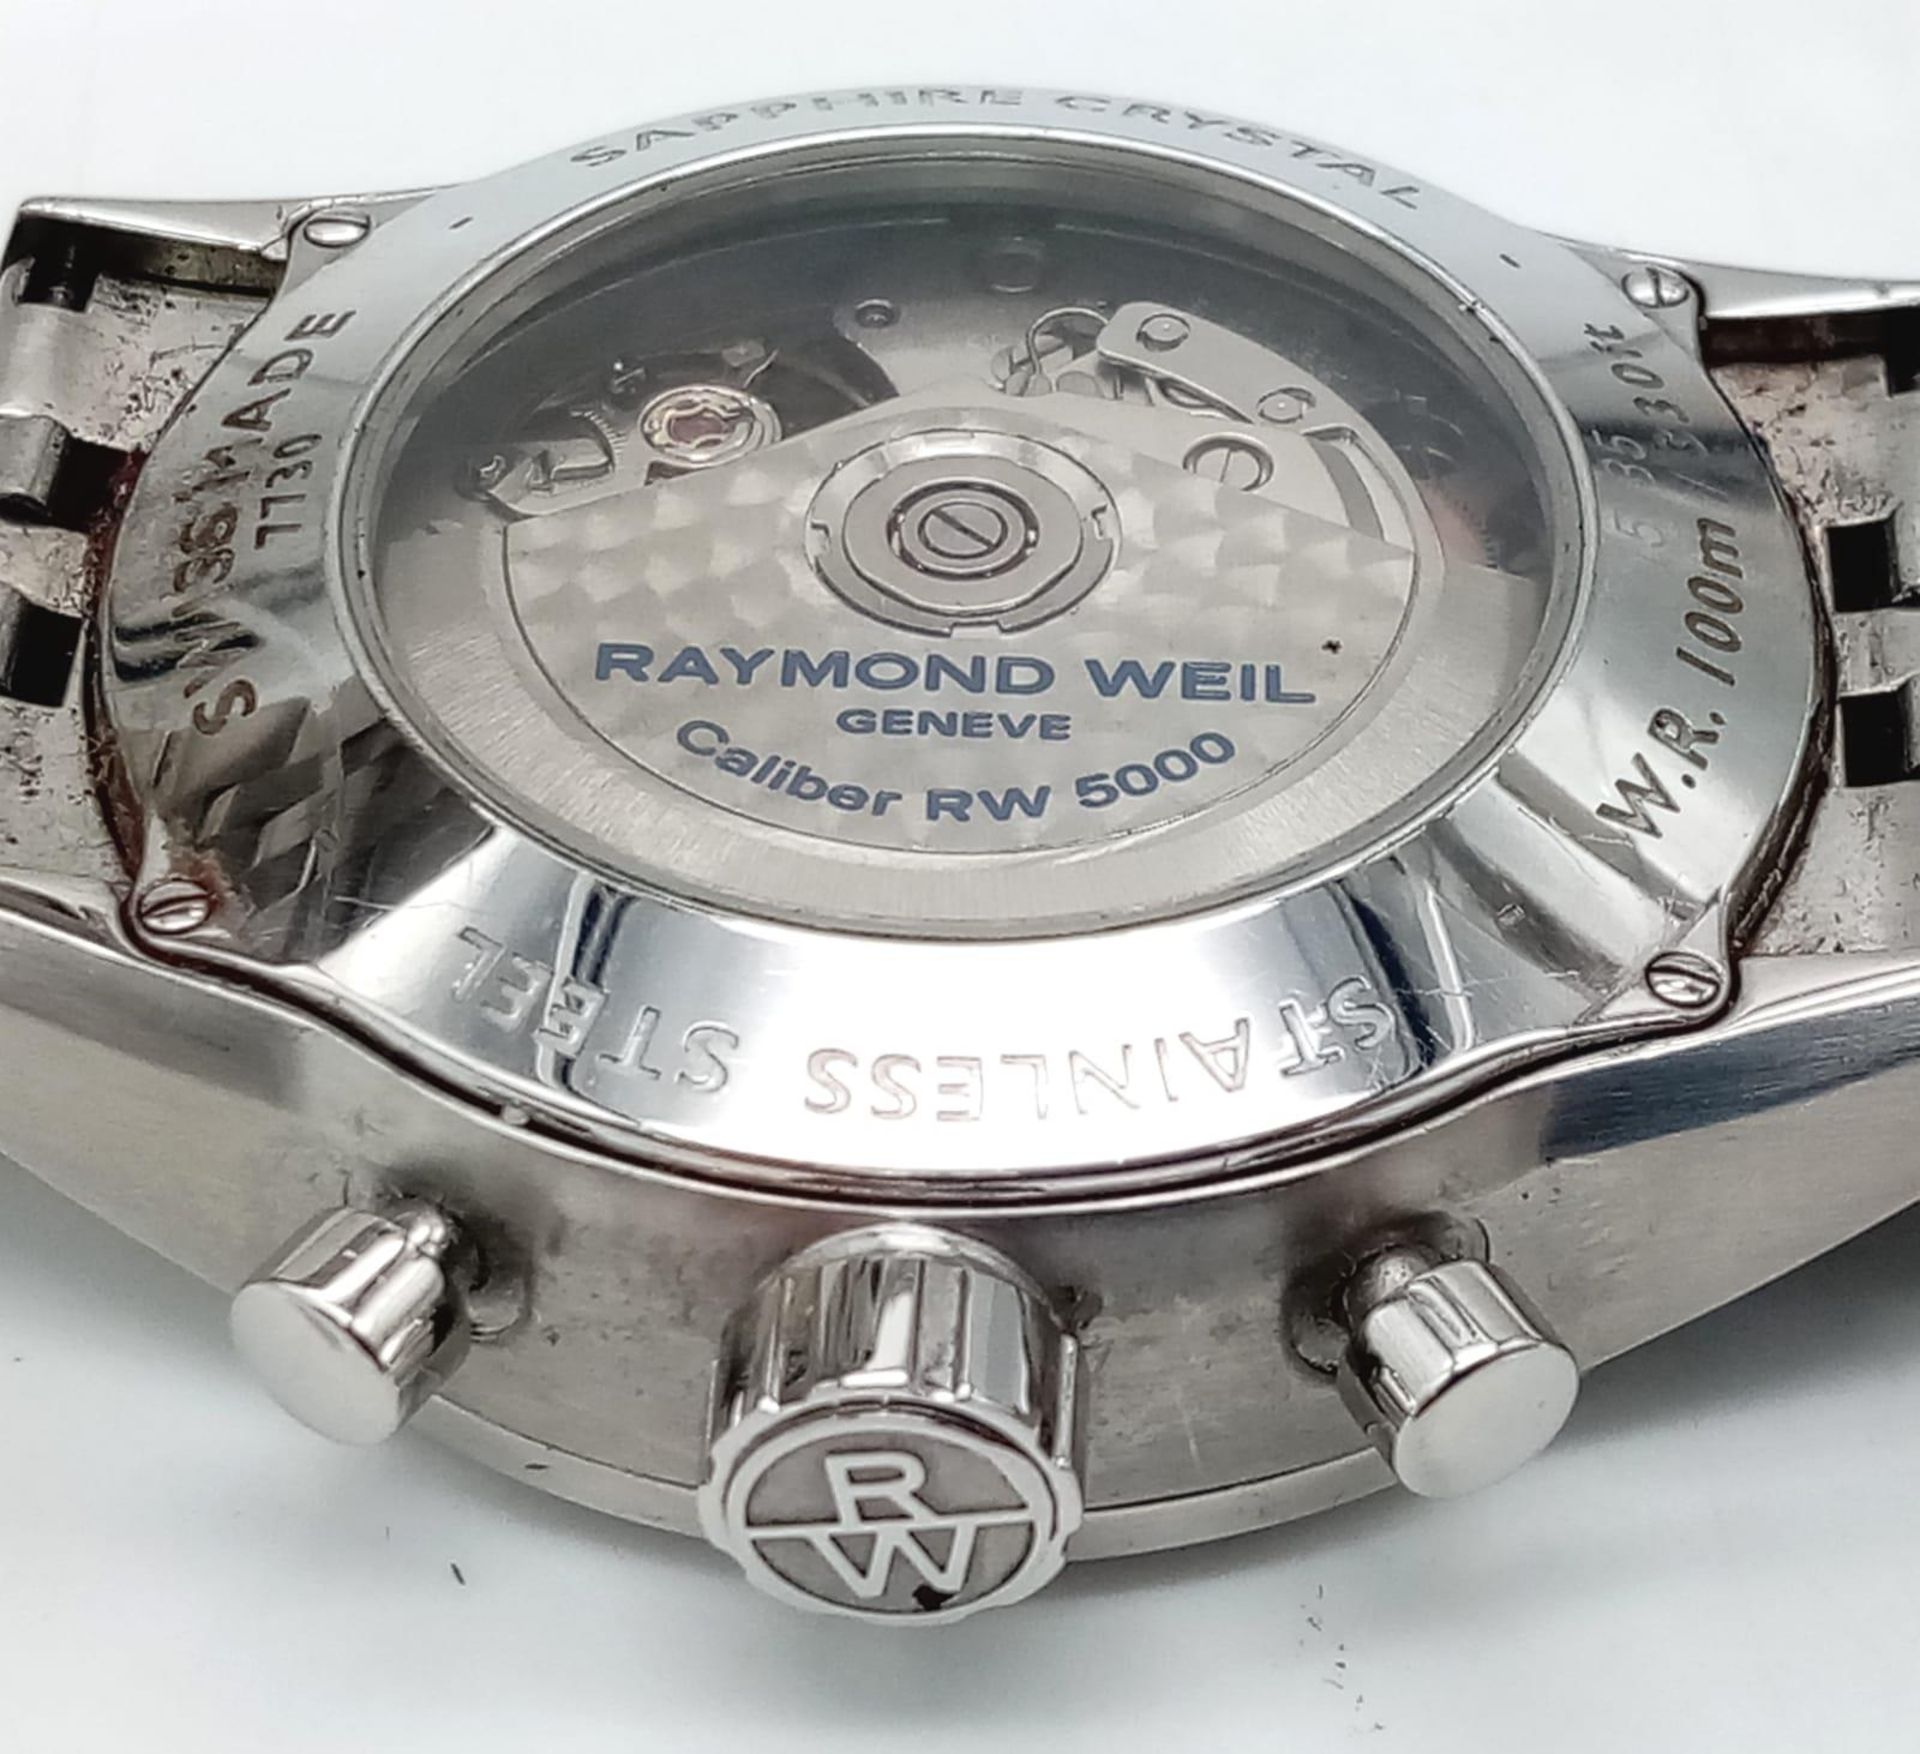 A Raymond Weil Automatic Chronograph Gents Watch. Stainless steel bracelet and case - 43mm. Black - Image 7 of 10